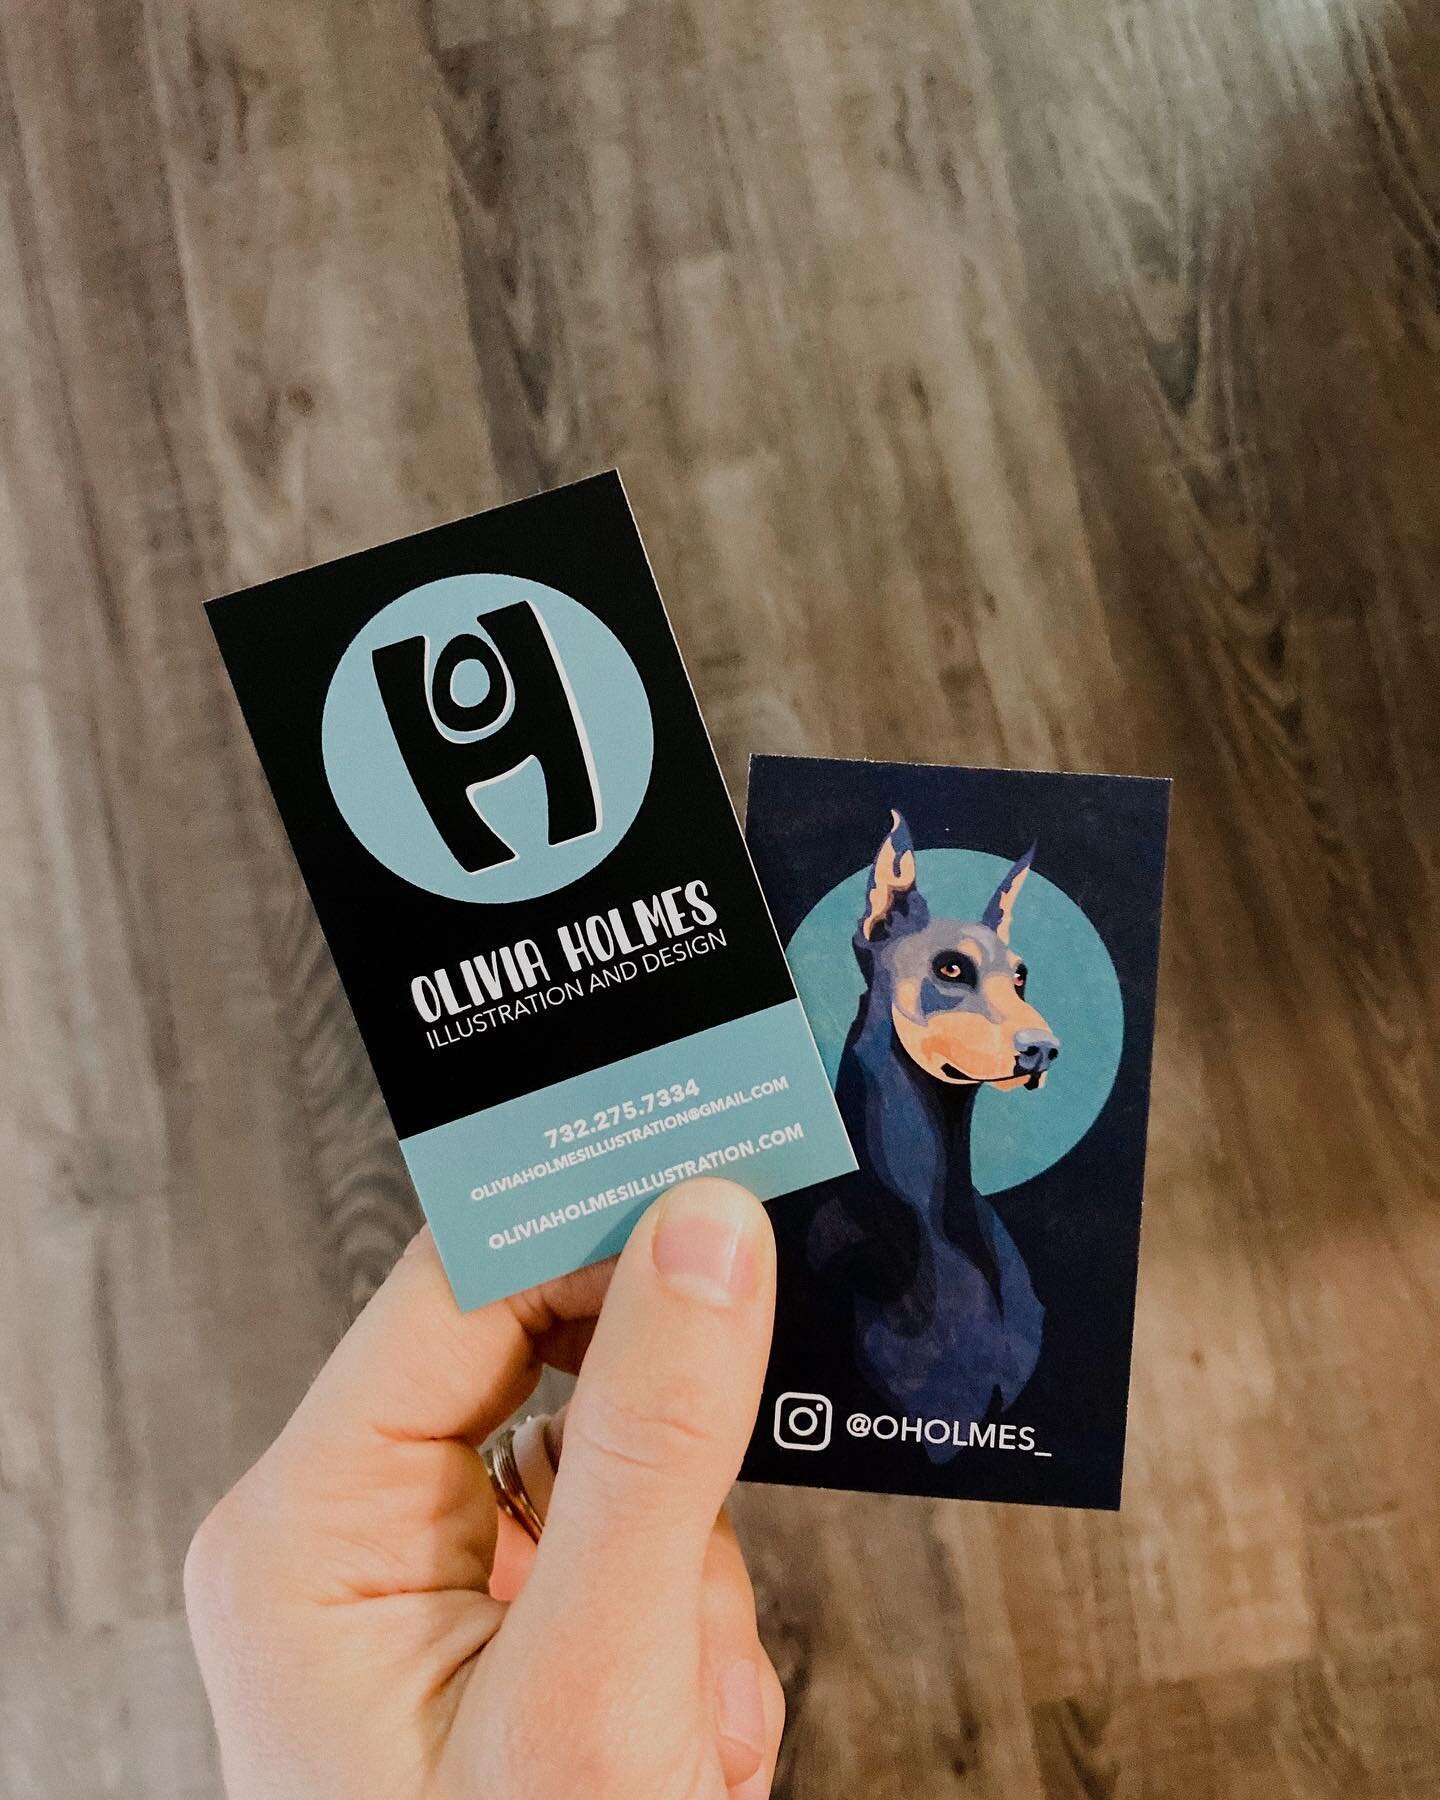 New logo, new cards! I mostly post illustrations on here, but my full time job is actually in graphic design. If you&rsquo;re looking for any design assets for branding, marketing, or anything along those lines, send me a message!